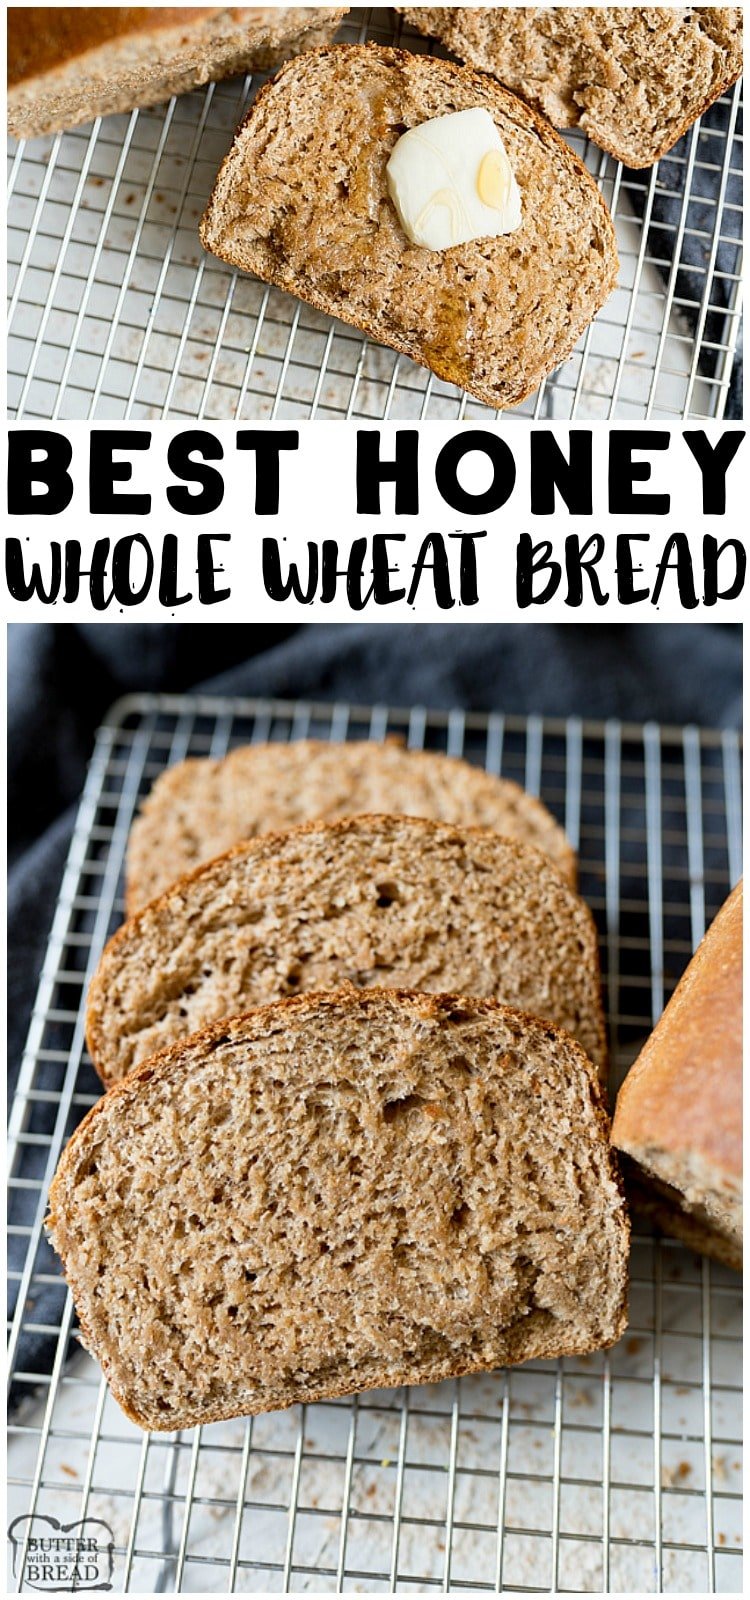 Honey Wheat Bread Recipe is a super simple way to use everyday ingredients to create delicious, hearty whole wheat bread. This Wheat Bread Recipe is perfect for beginner bread makers.